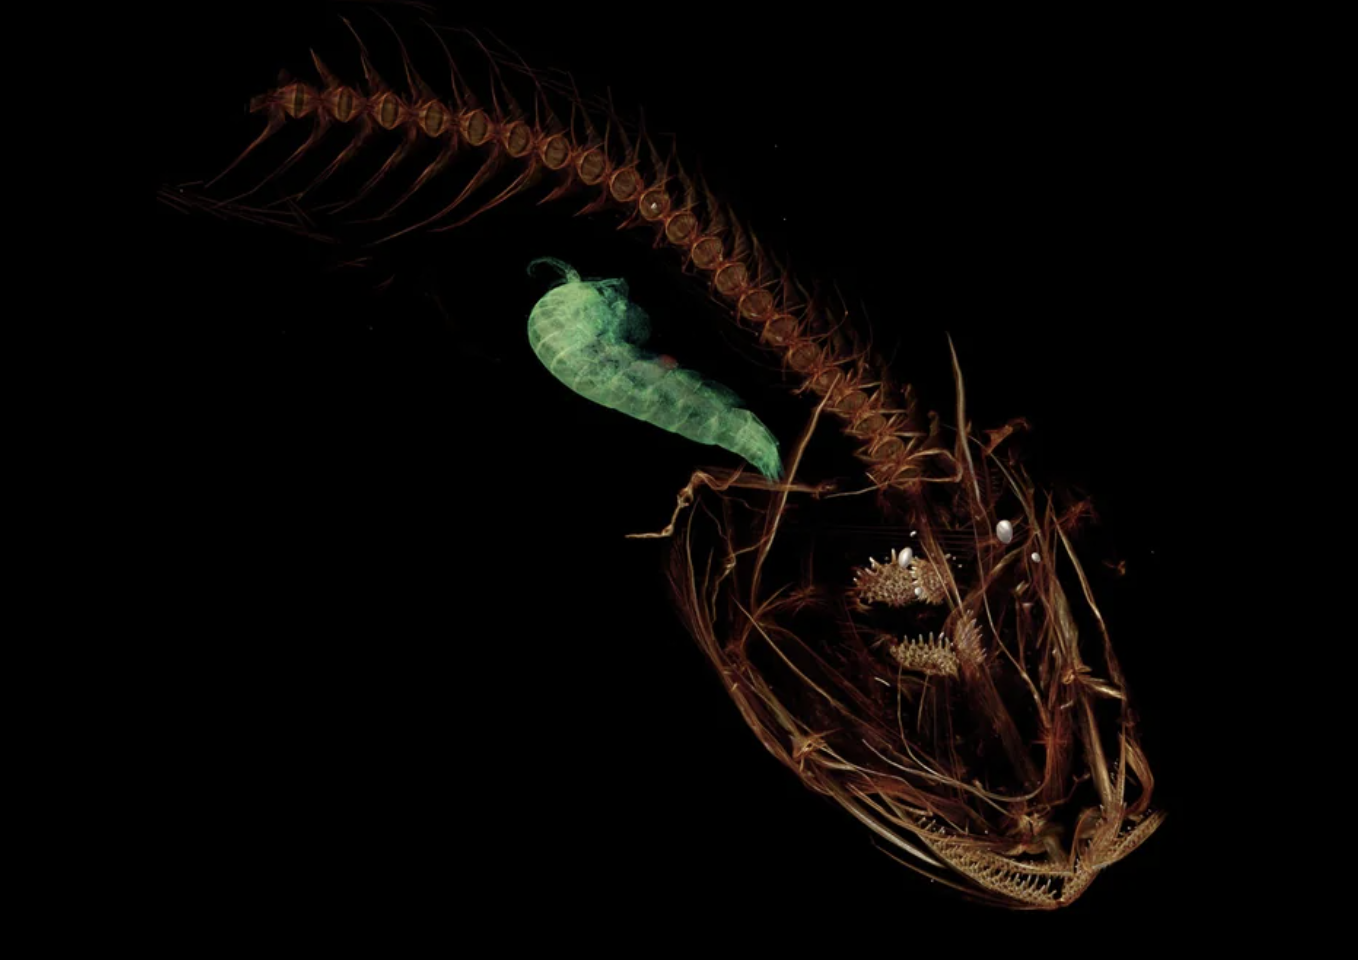 deepest fish in the ocean